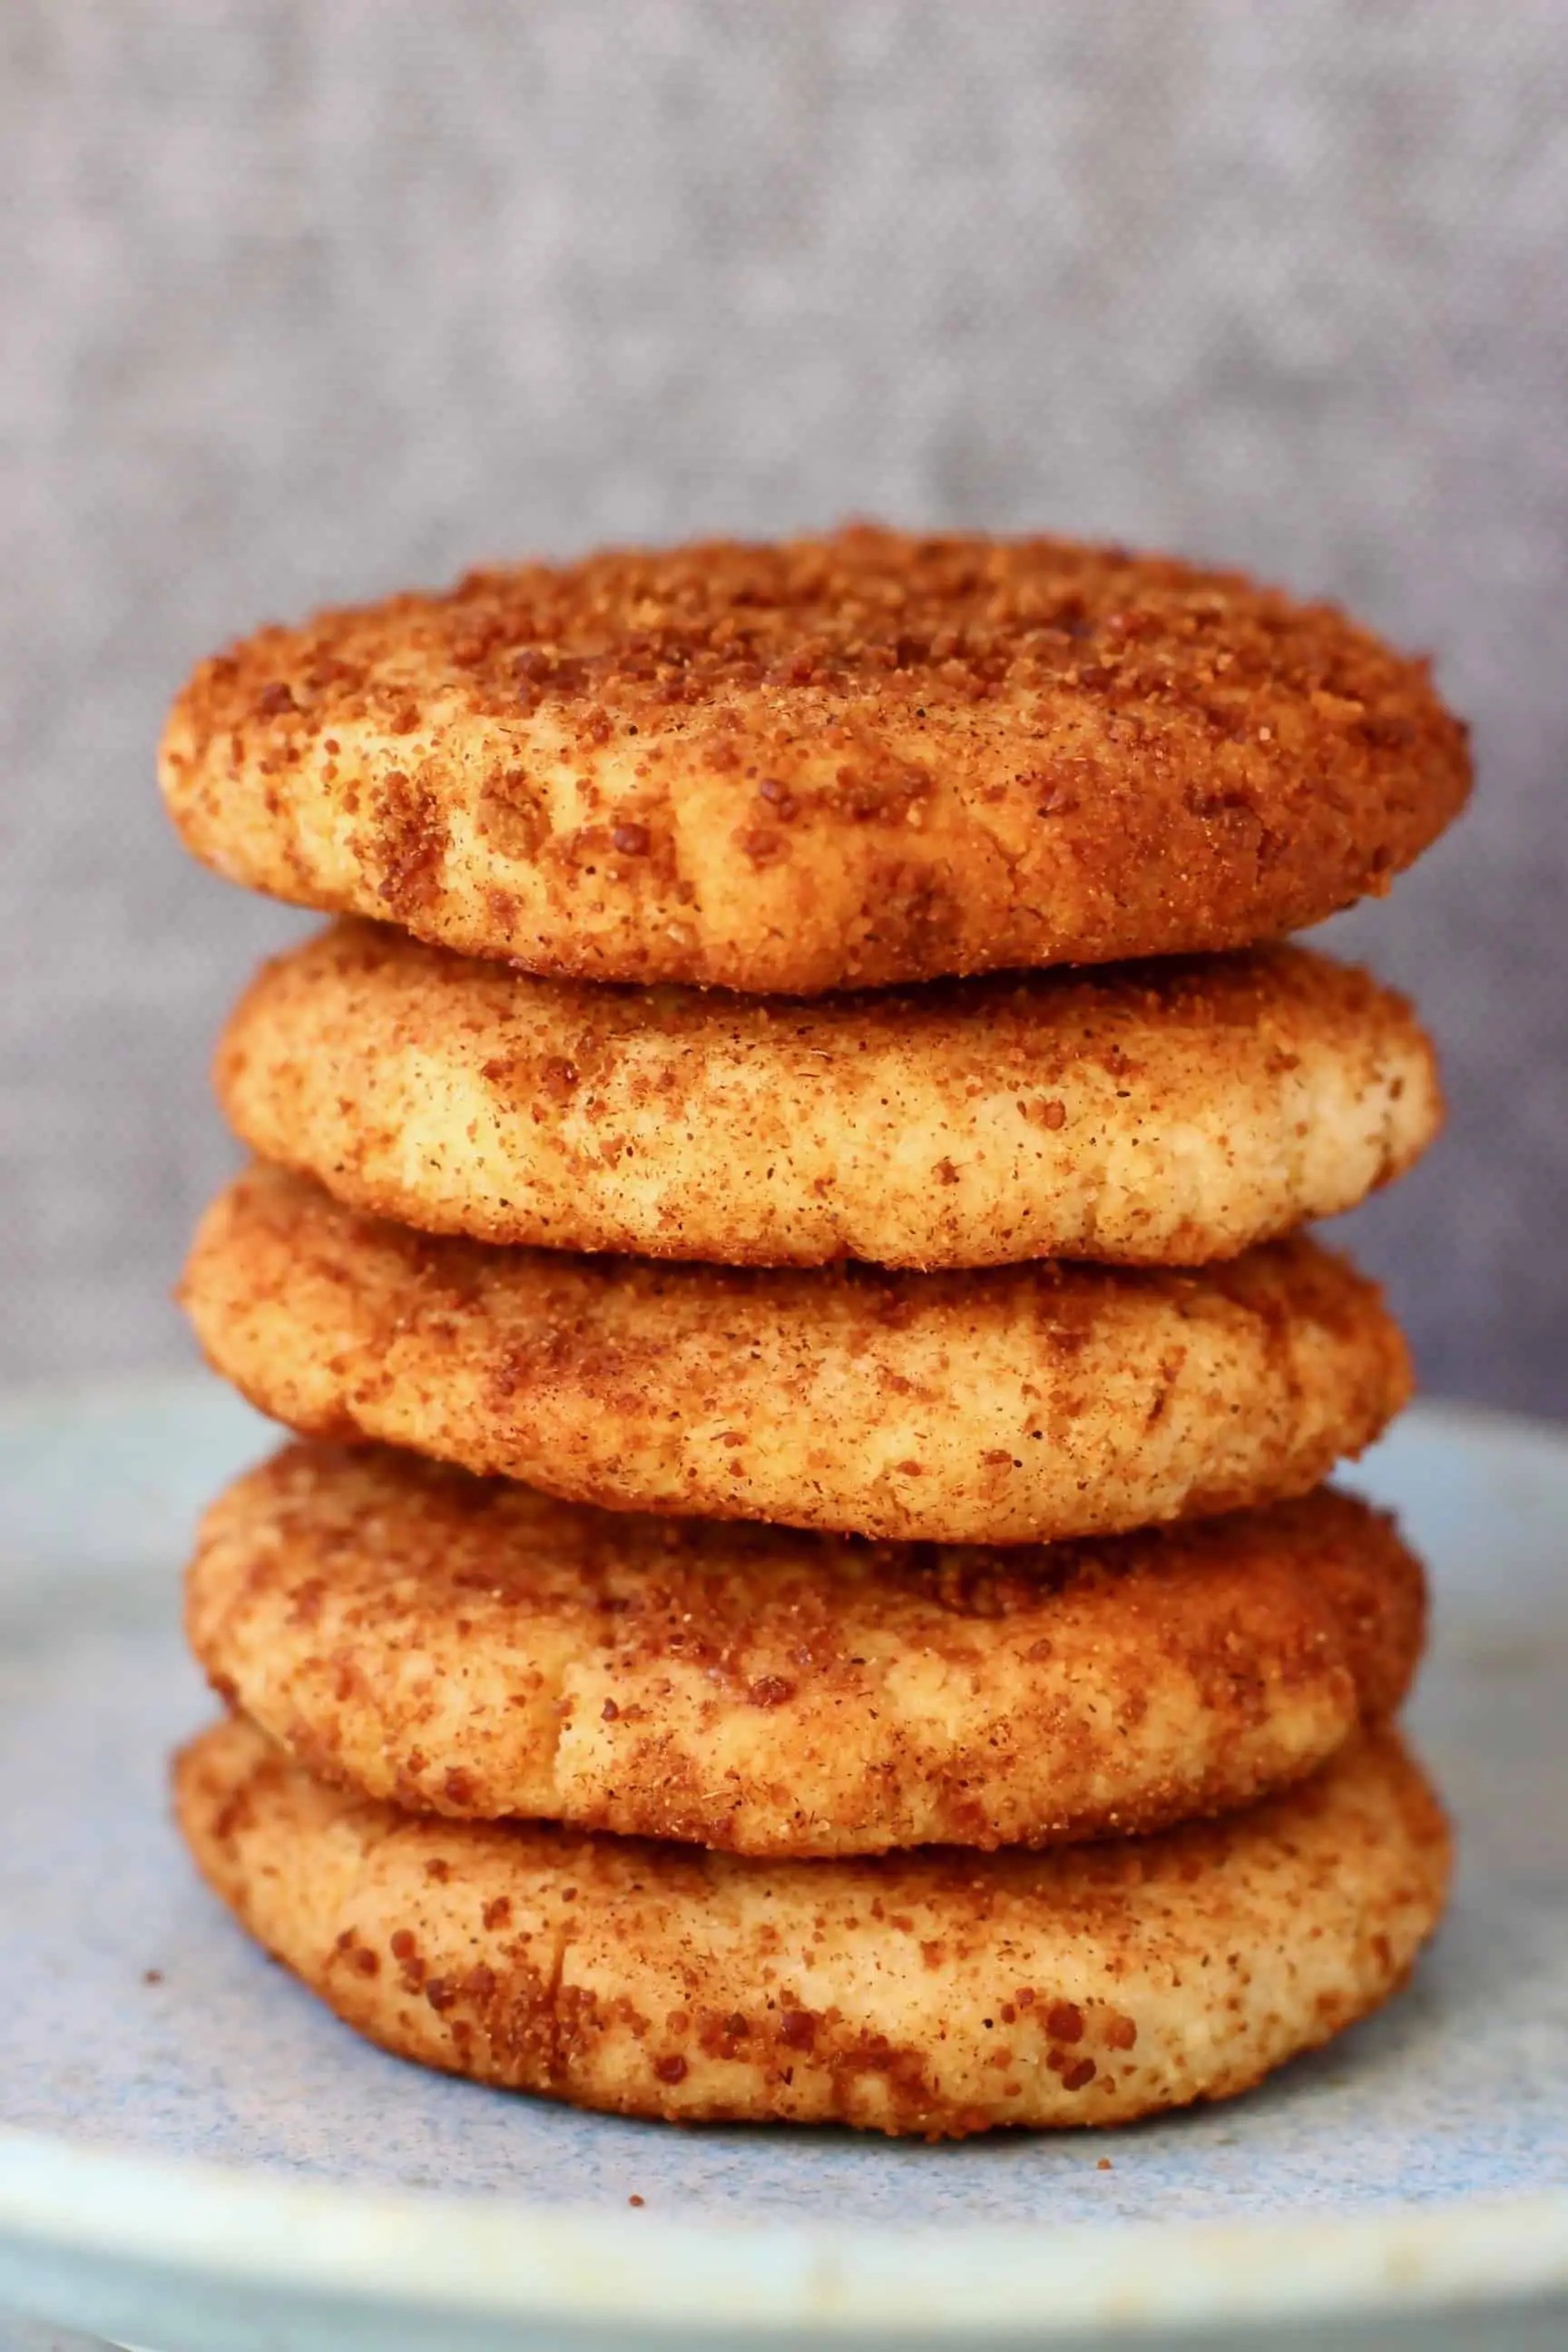 Five snickerdoodles coated in brown cinnamon sugar stacked on top of each other on a light blue plate 